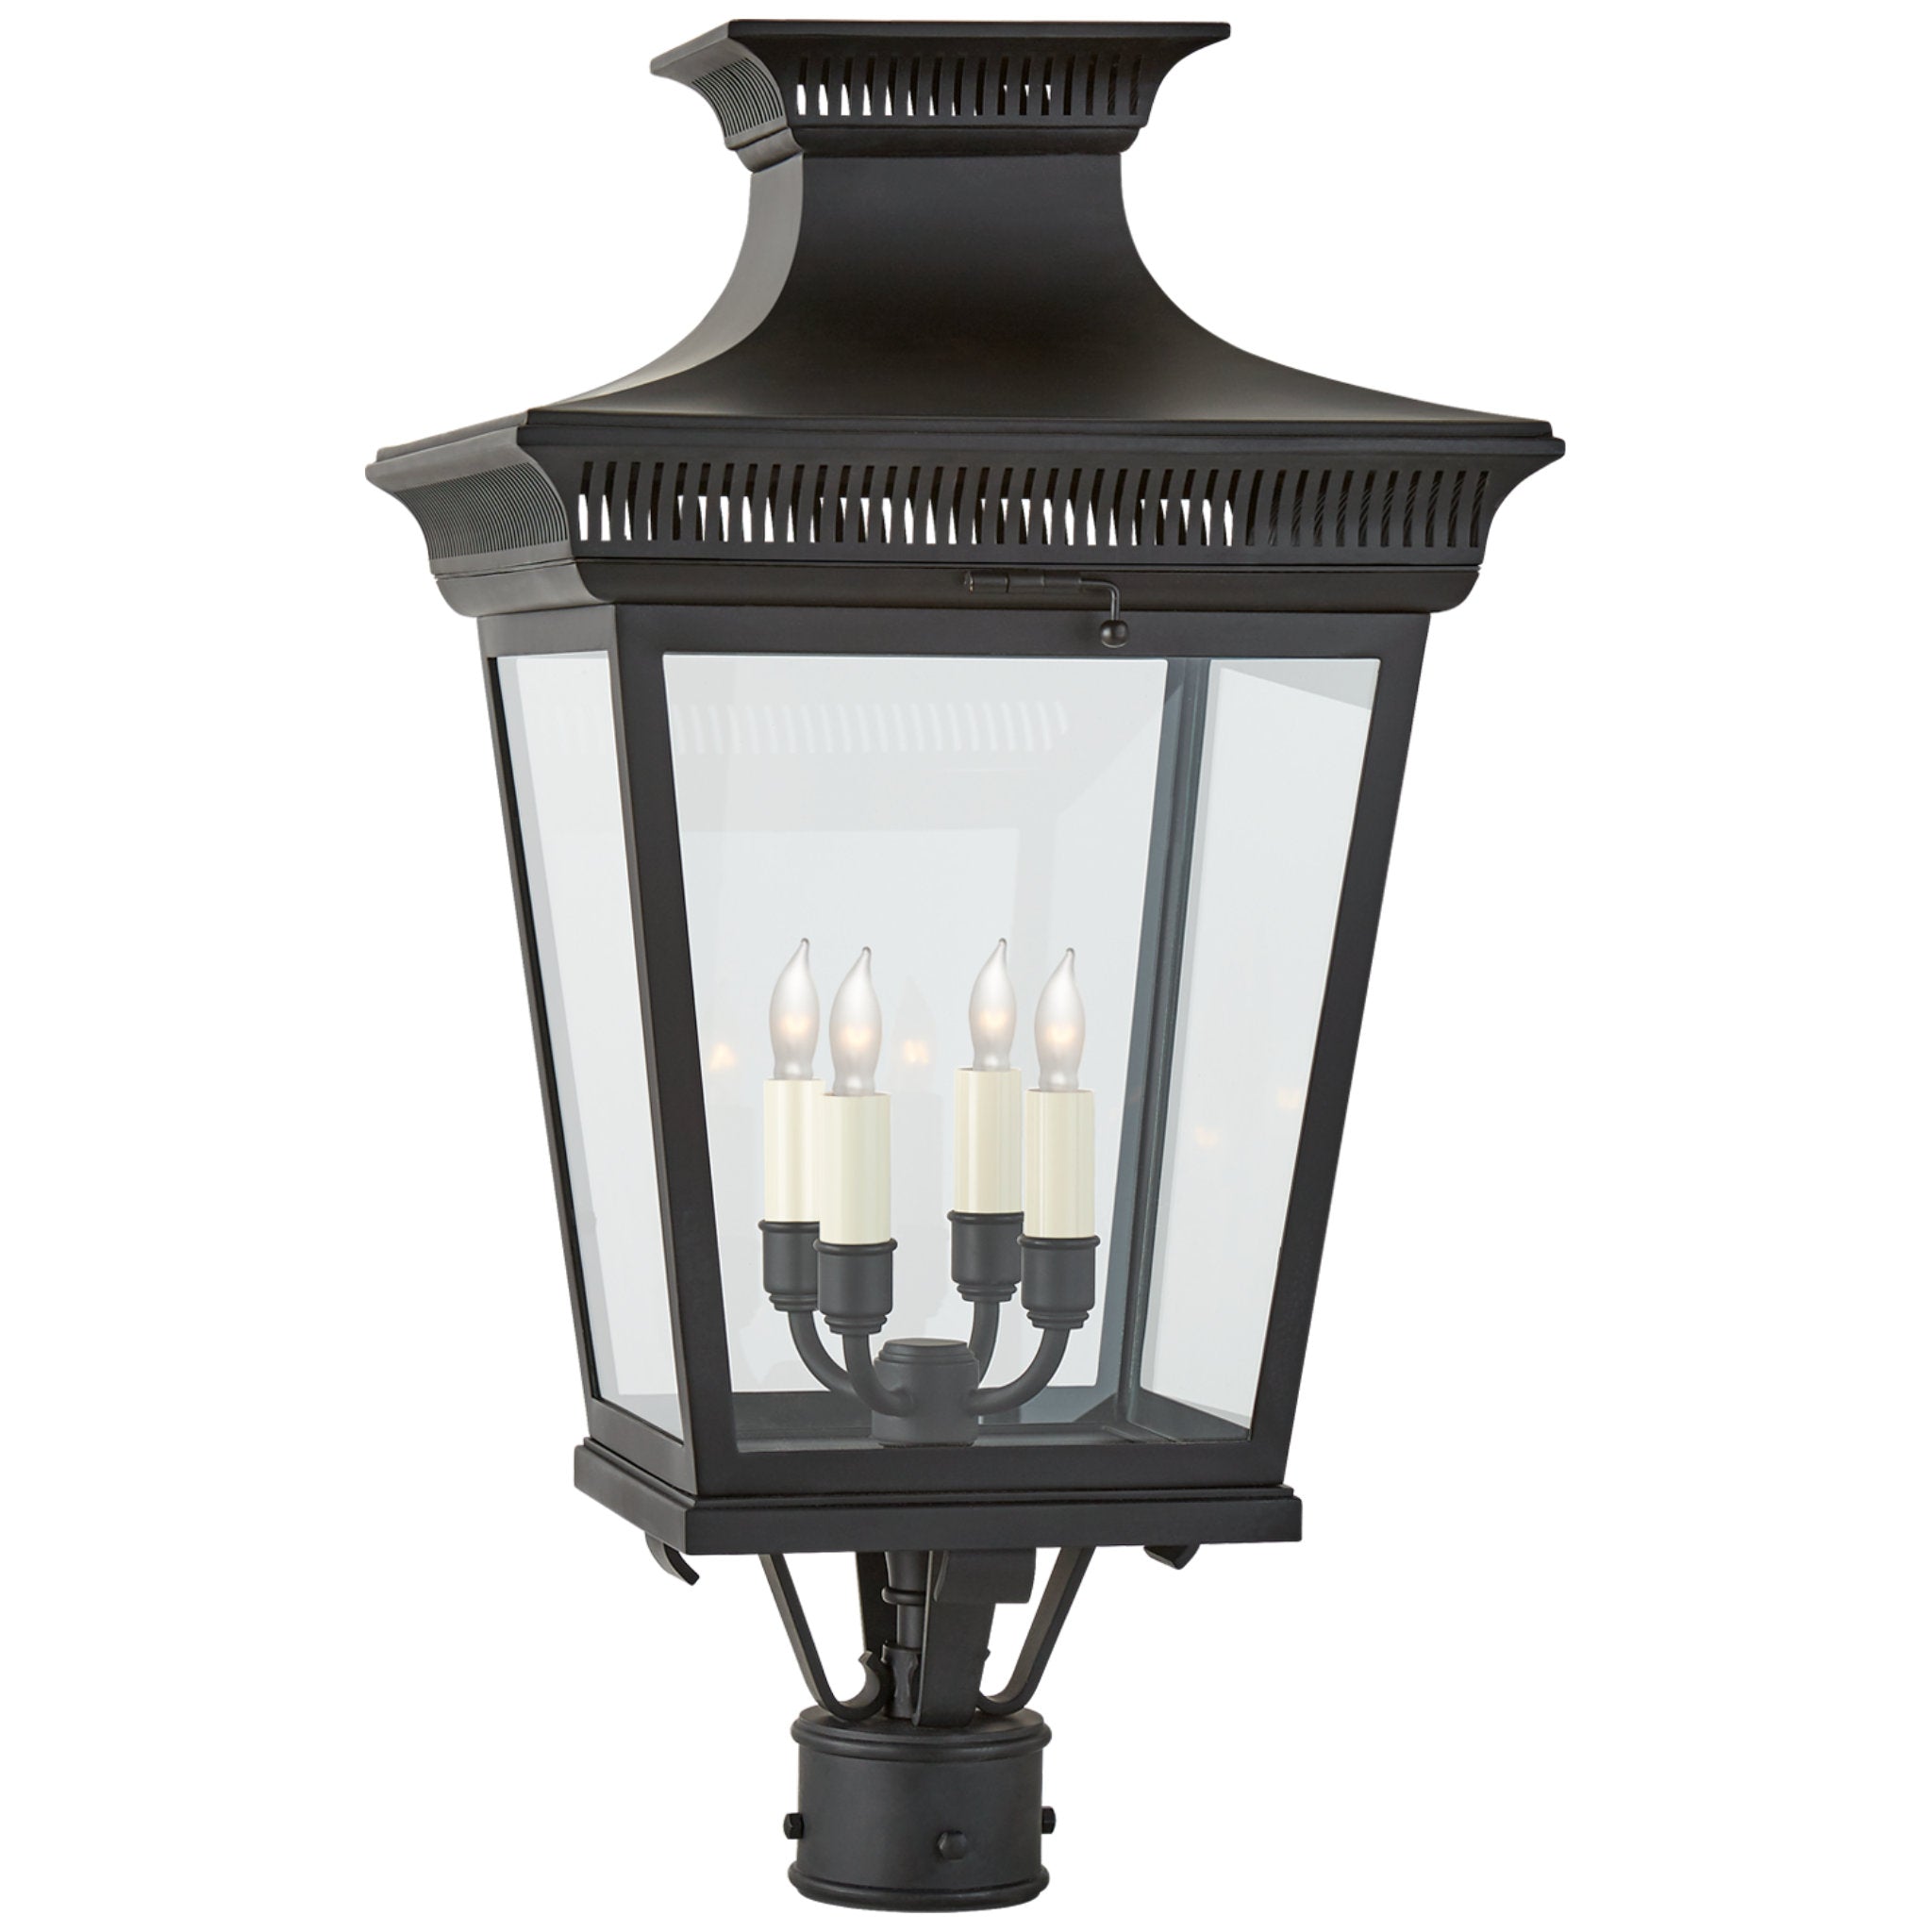 Chapman & Myers Elsinore Medium Post Lantern in Black with Clear Glass